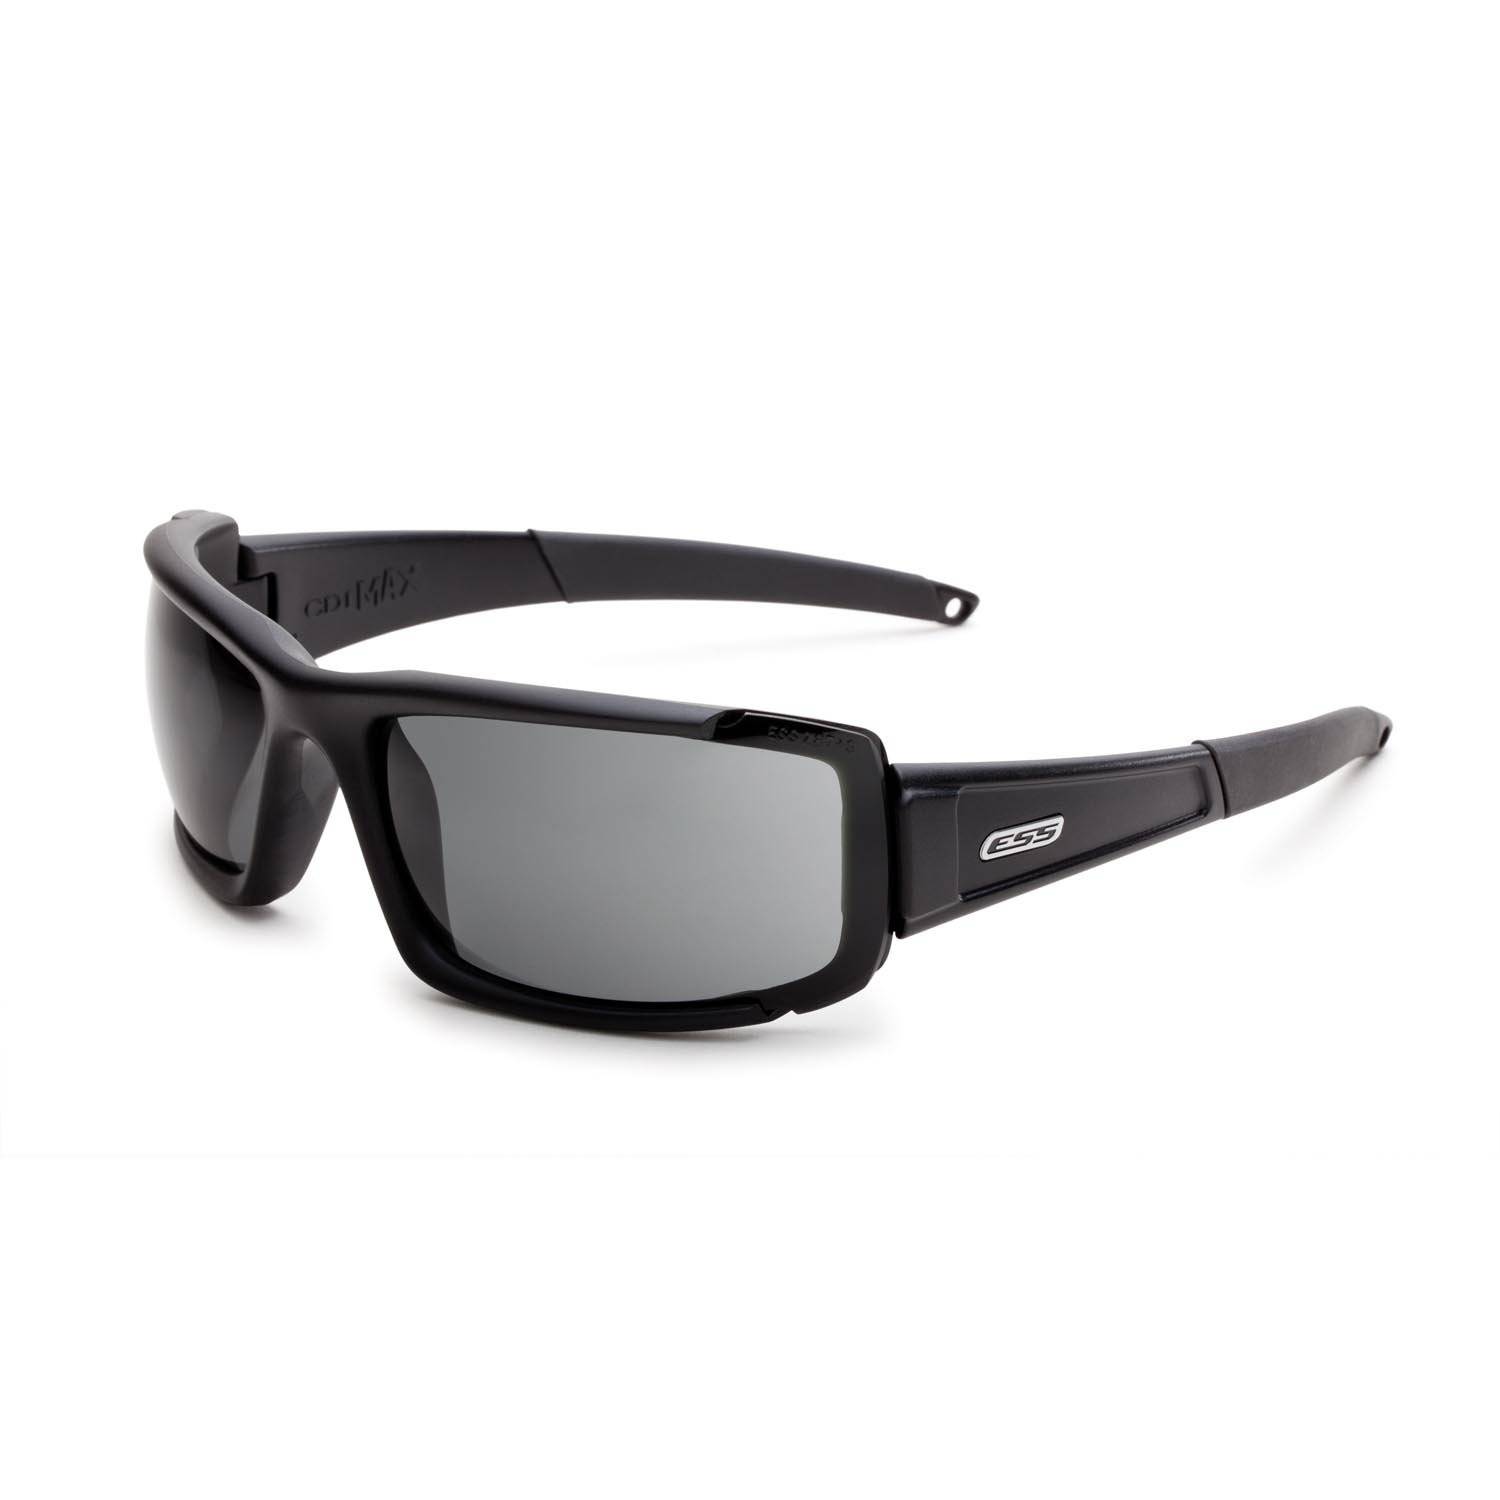 ESS CDI Max Black Sunglasses with 2 Interchangeable Lenses